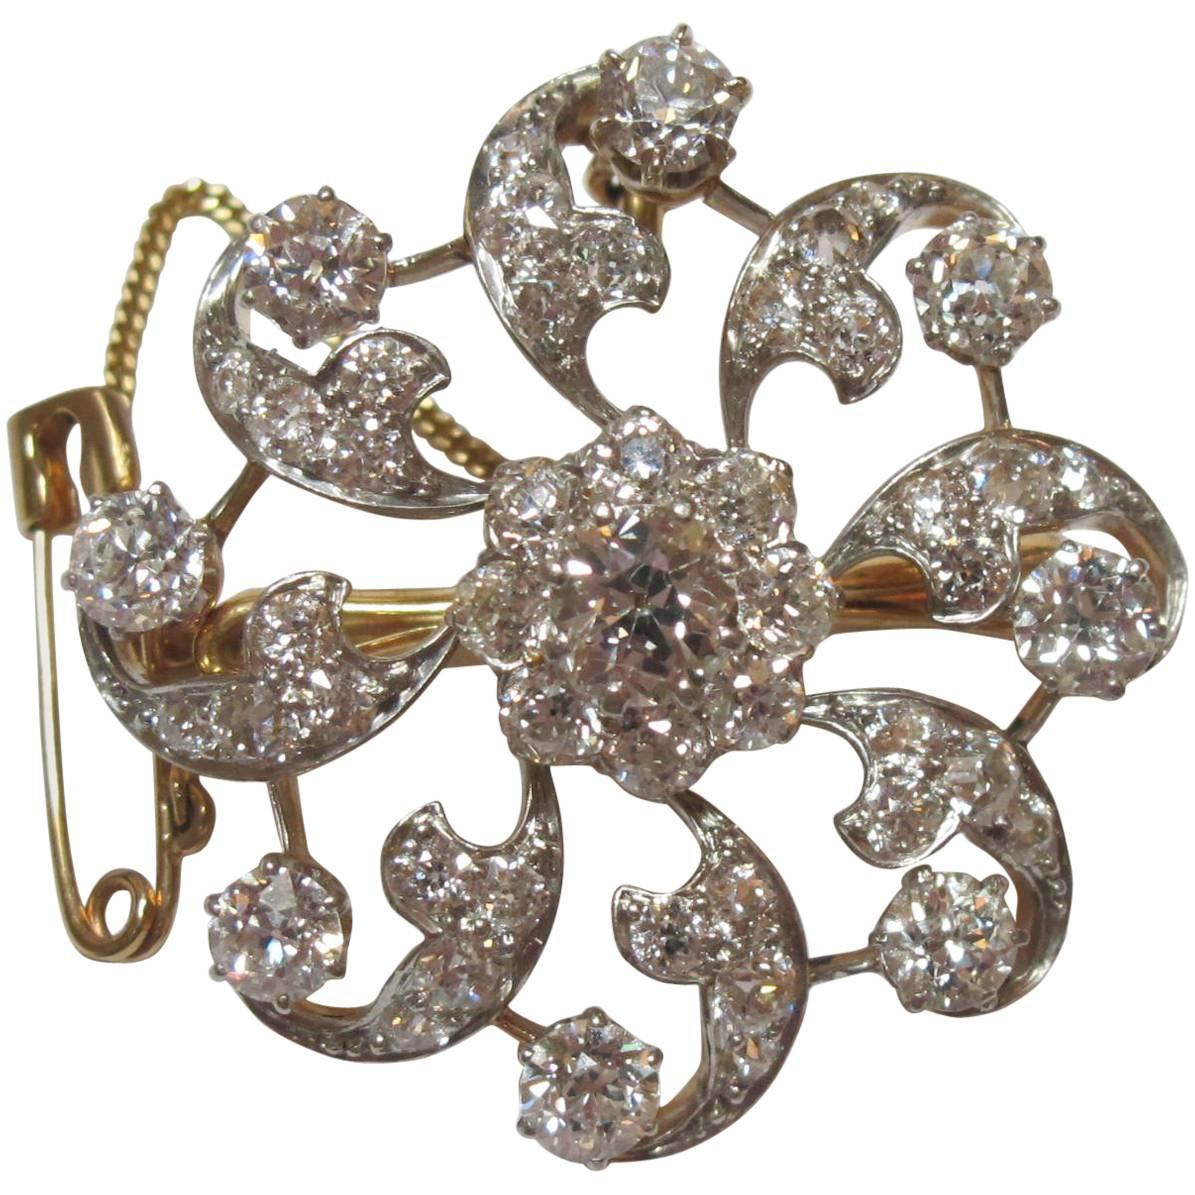 Diamond pin set in both platinum and yellow gold. Diamonds are Old European Cut and Transitional Cut, weighing a total of 5.6 carats. Center stone weighs 0.8-0.85 cts and is FG color, SI2 clarity . Surrounding stones range from .04-.30 cts each, all